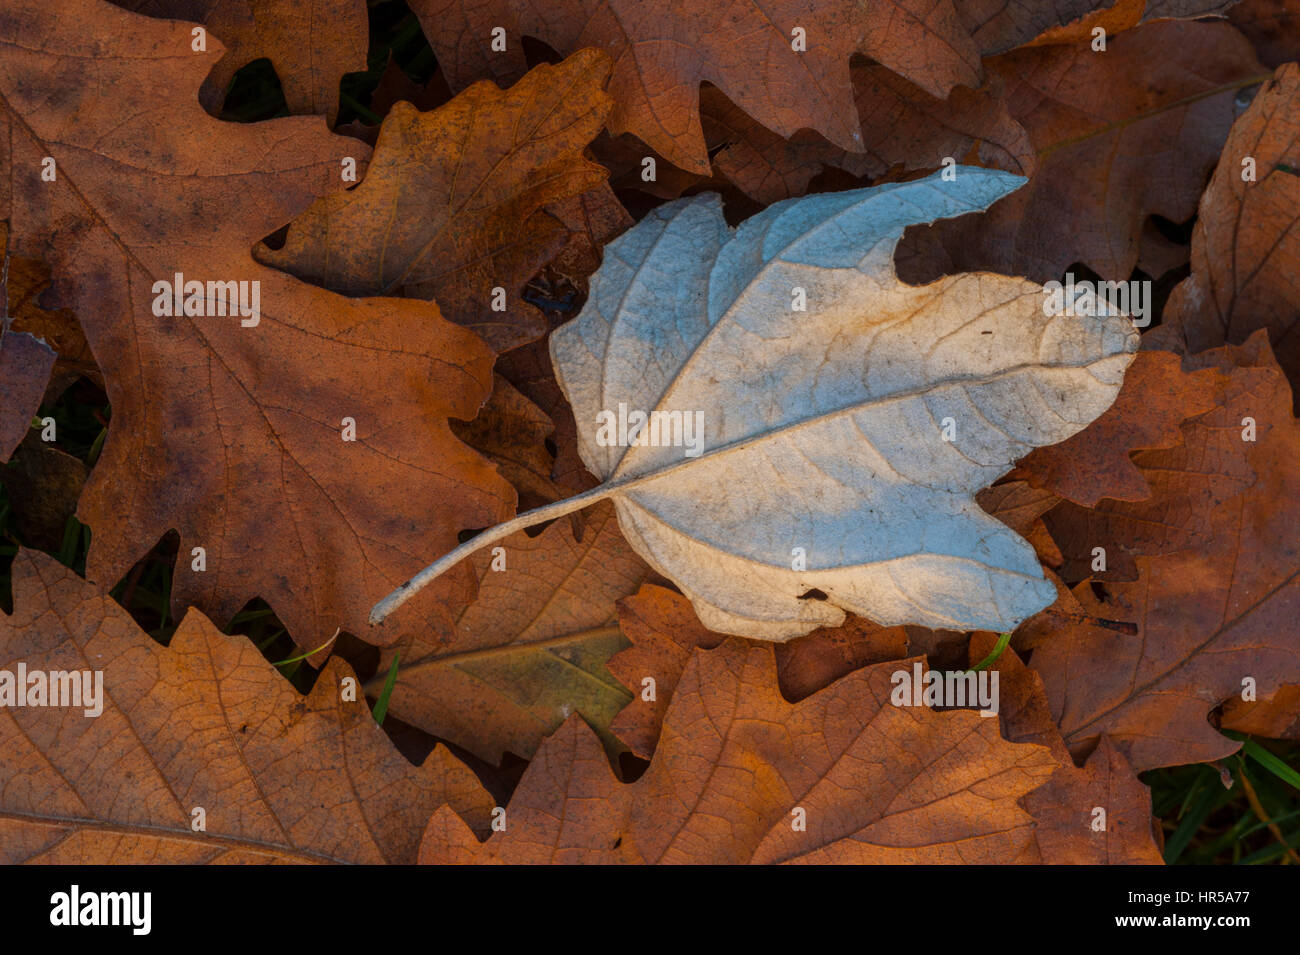 Light coloured leaf sitting on a bed of brown oak leaves. Stock Photo